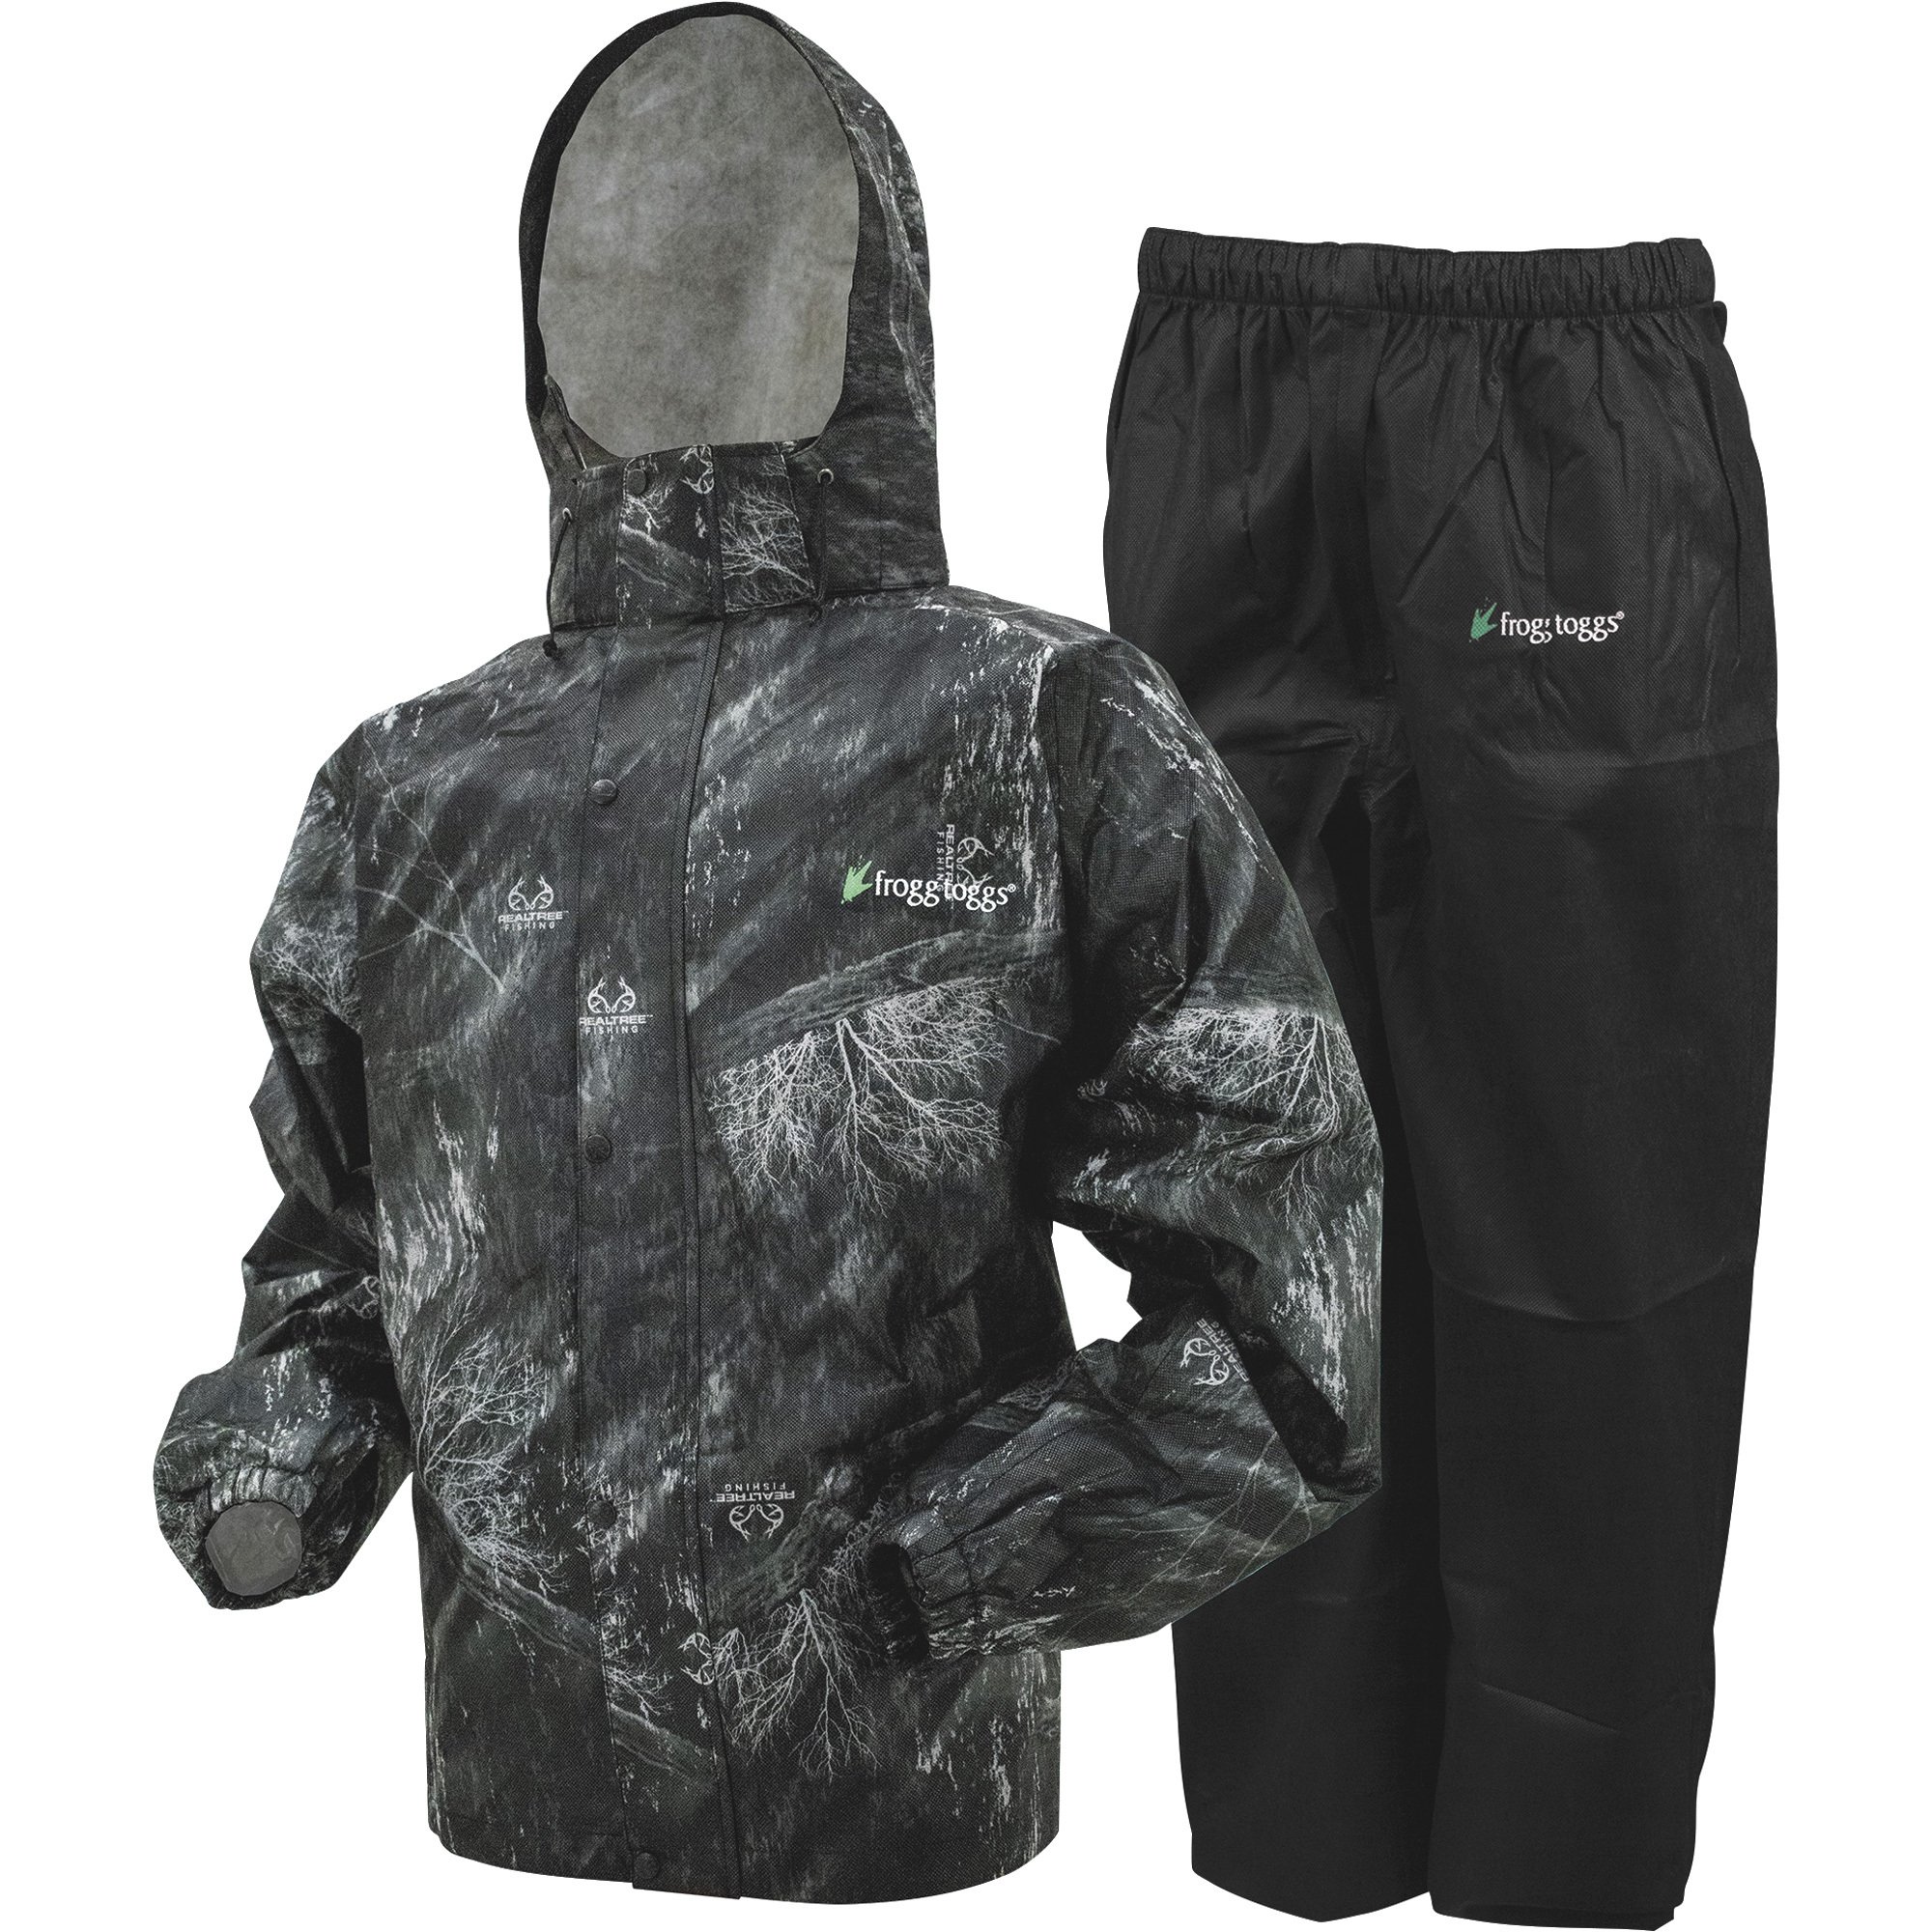 Frogg Toggs Men's All Sports Rain and Wind Jacket and Pants Suit